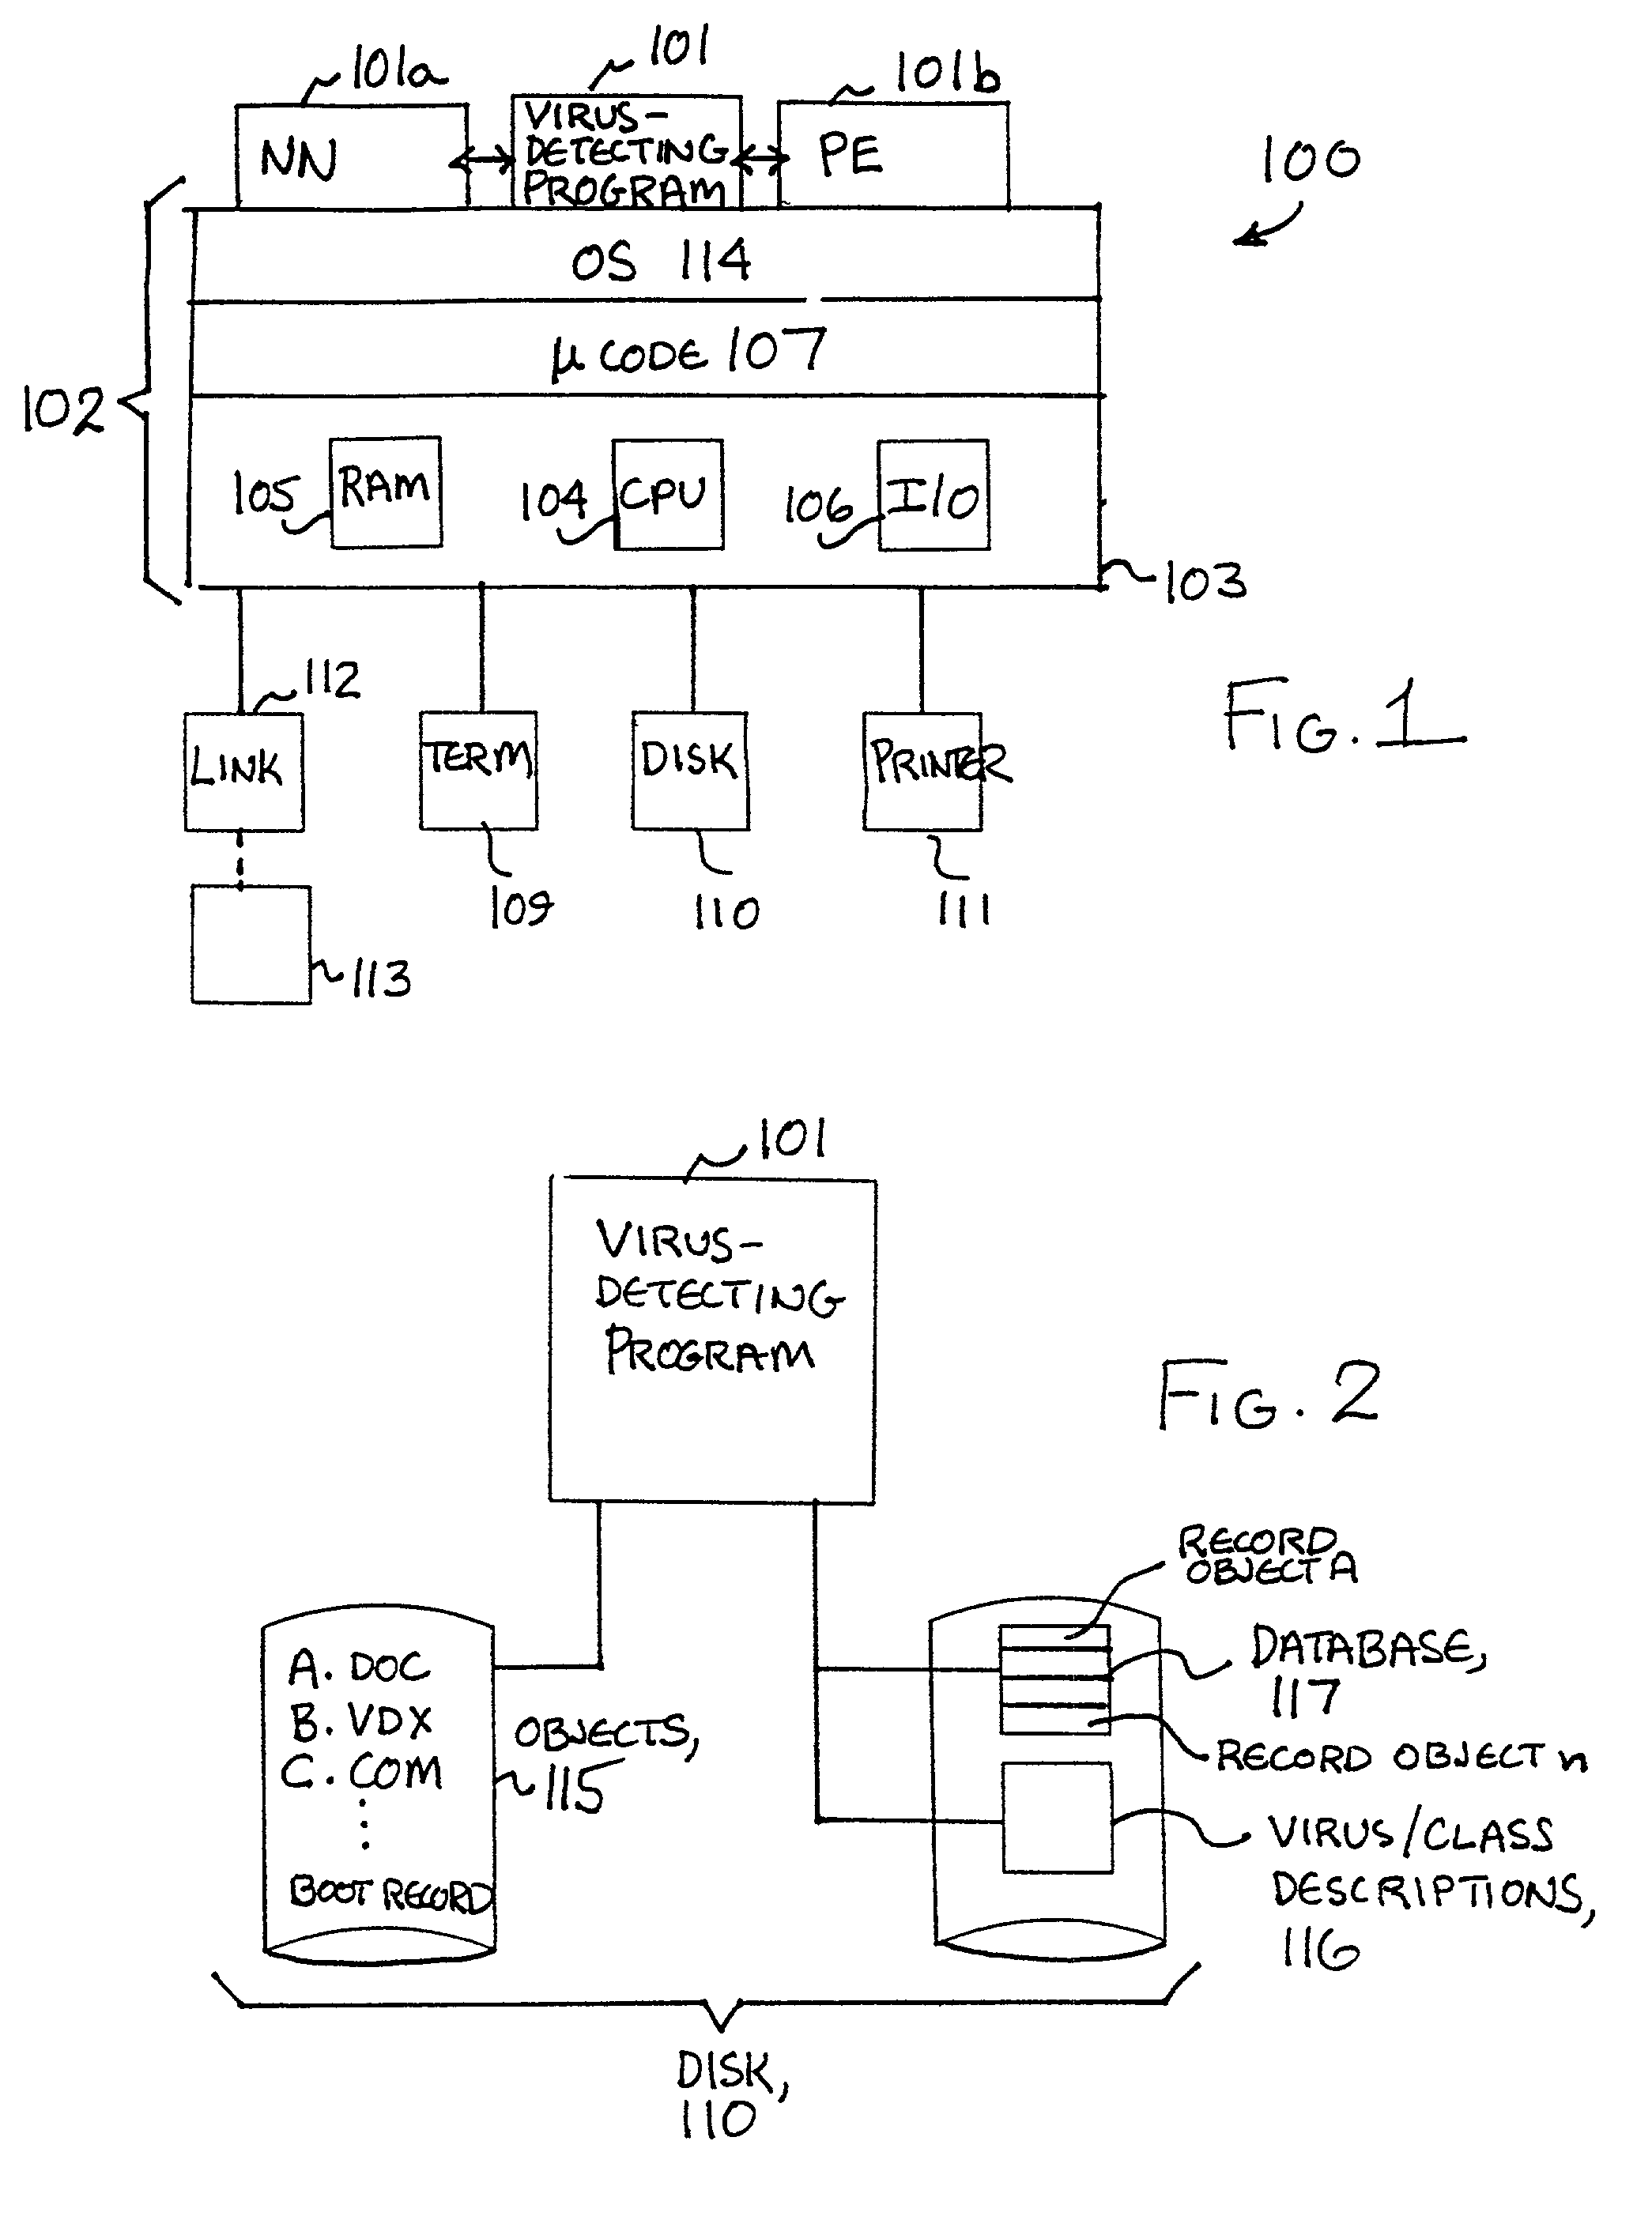 Method and apparatus for increasing virus detection speed using a database